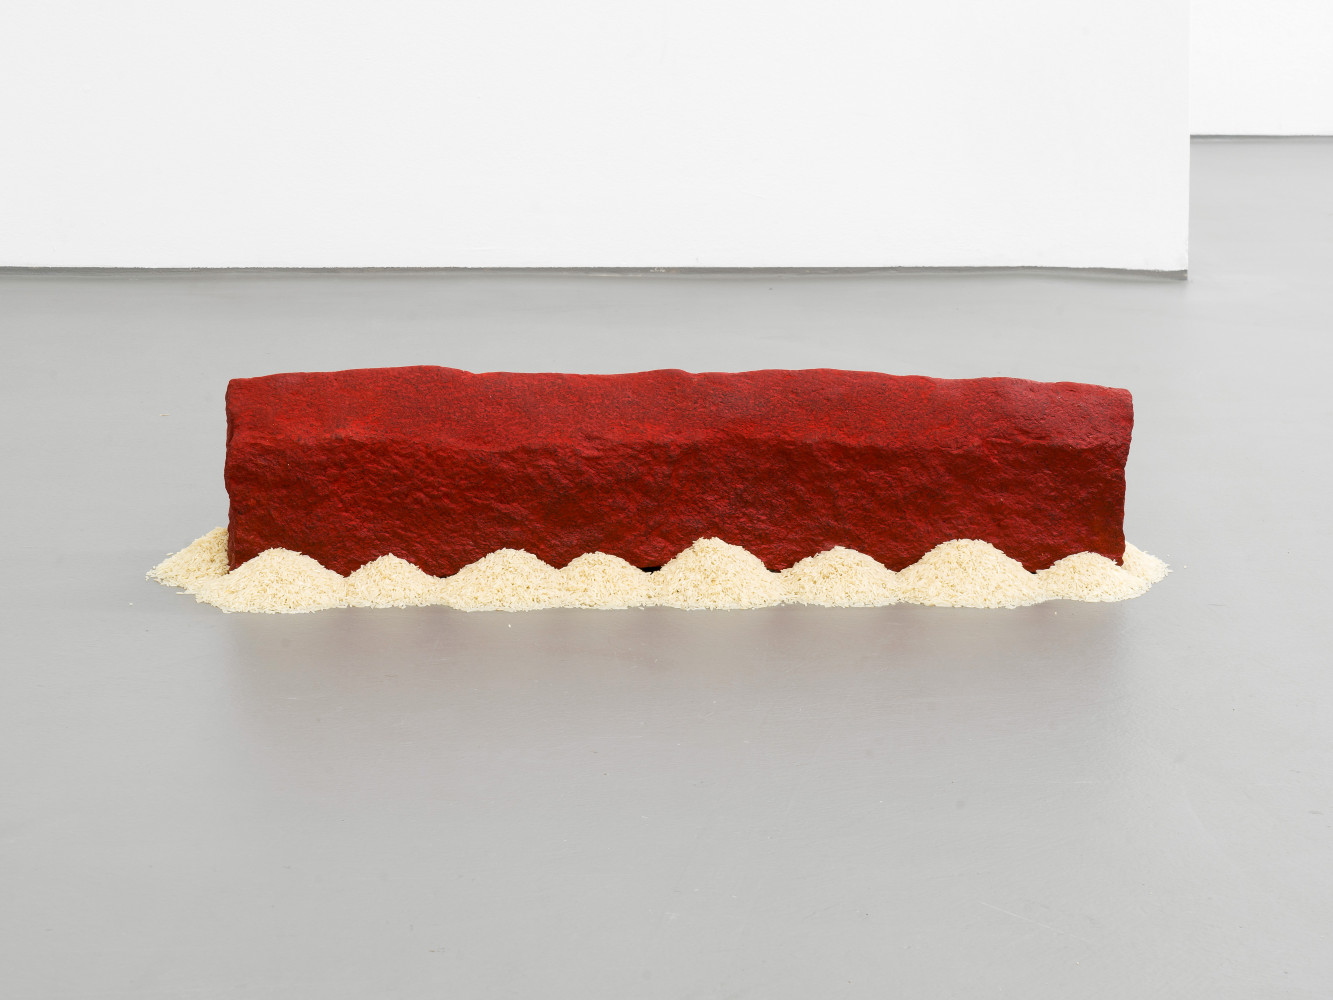 Wolfgang Laib, ‘Rice House’, 2009, Indian granite, red pigment and sunseed oil, rice